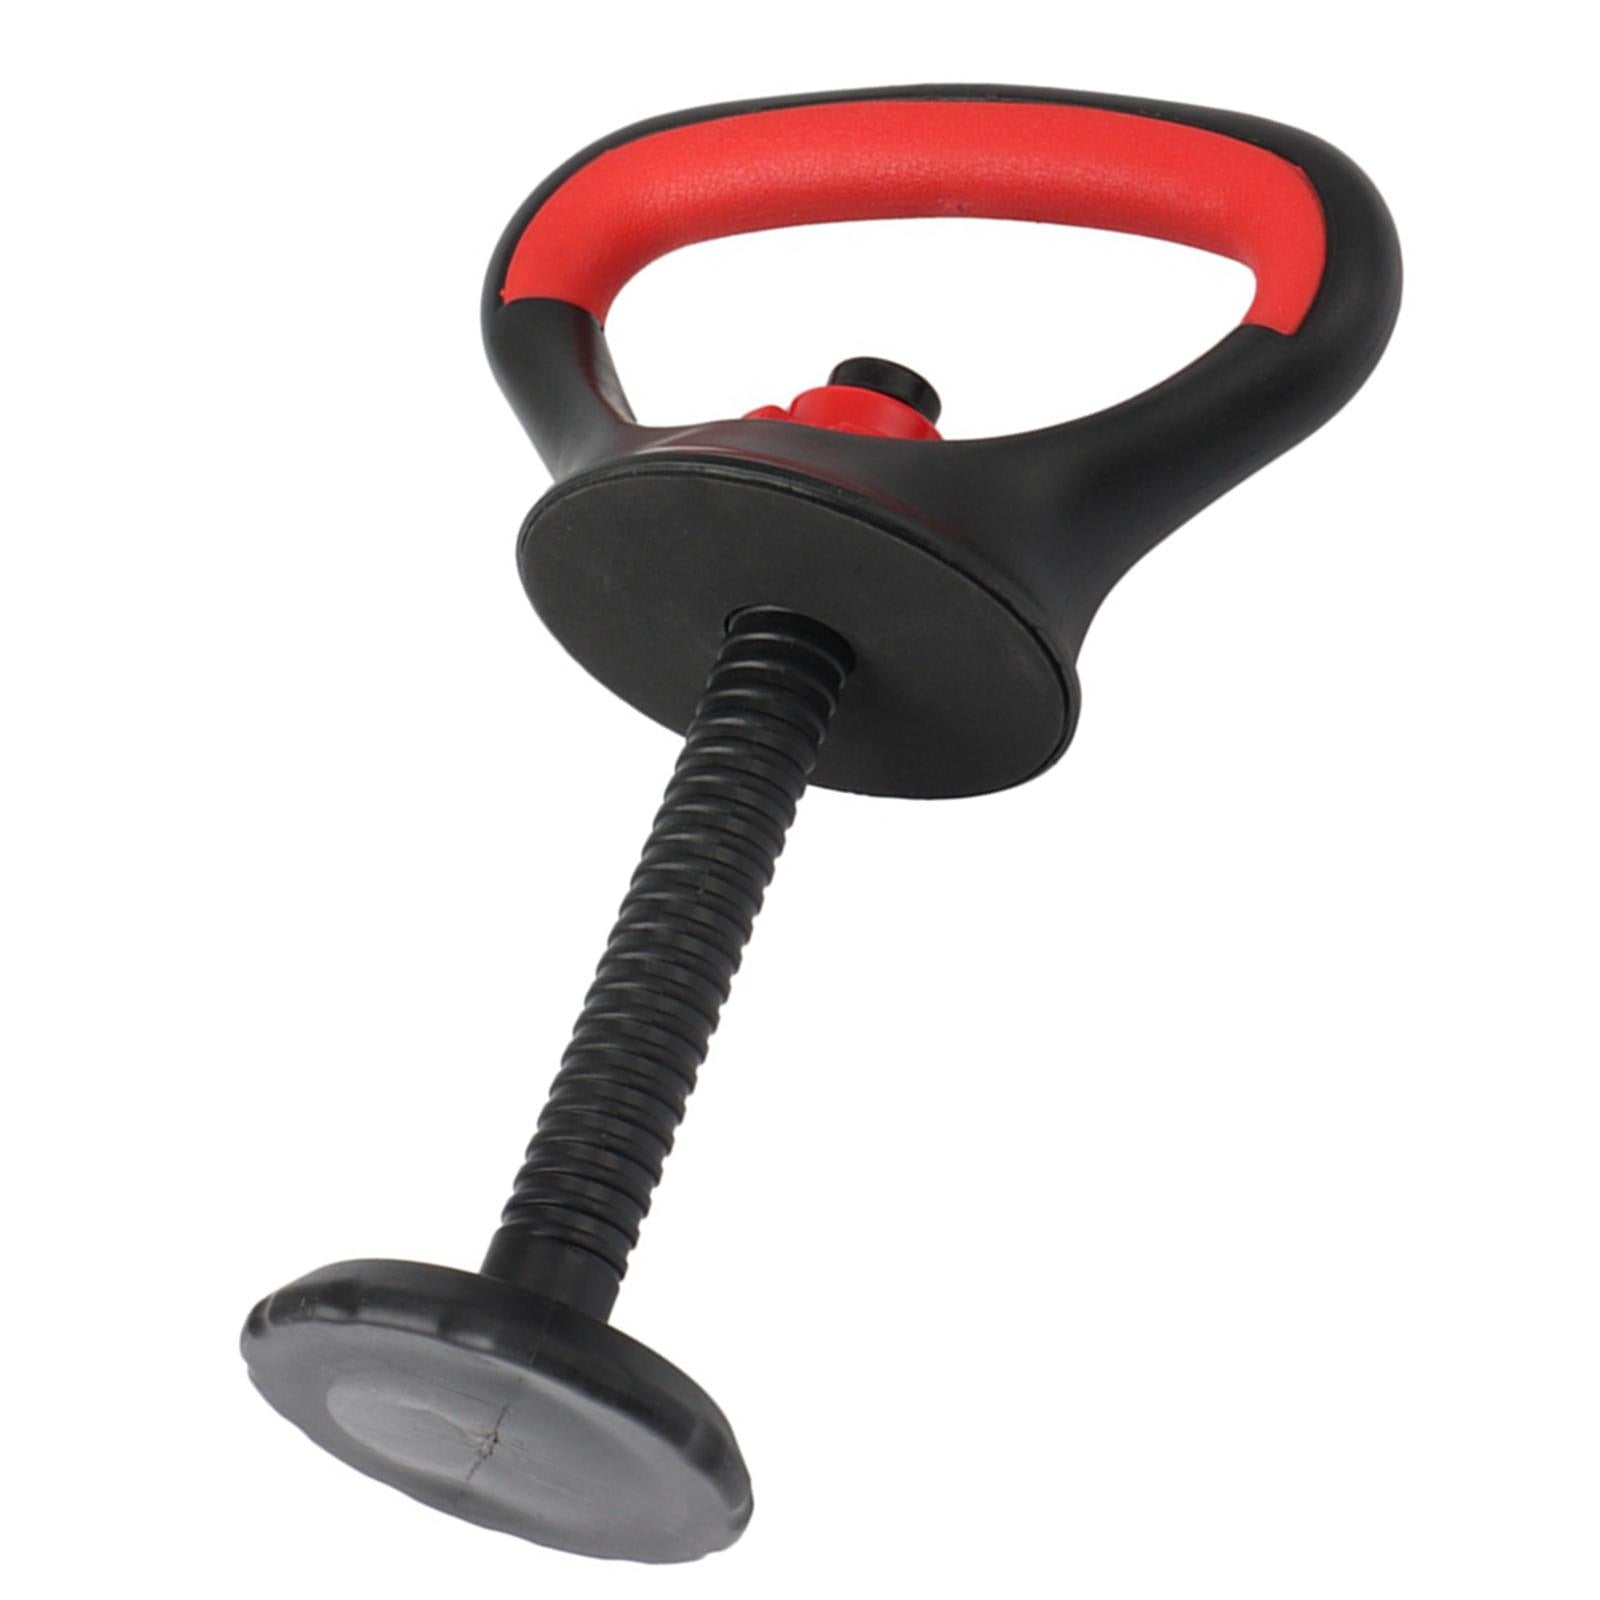 A black and red JB Muscle™ Adjustable Kettlebell Handle: Dynamic Arm Strength Training on a white background.